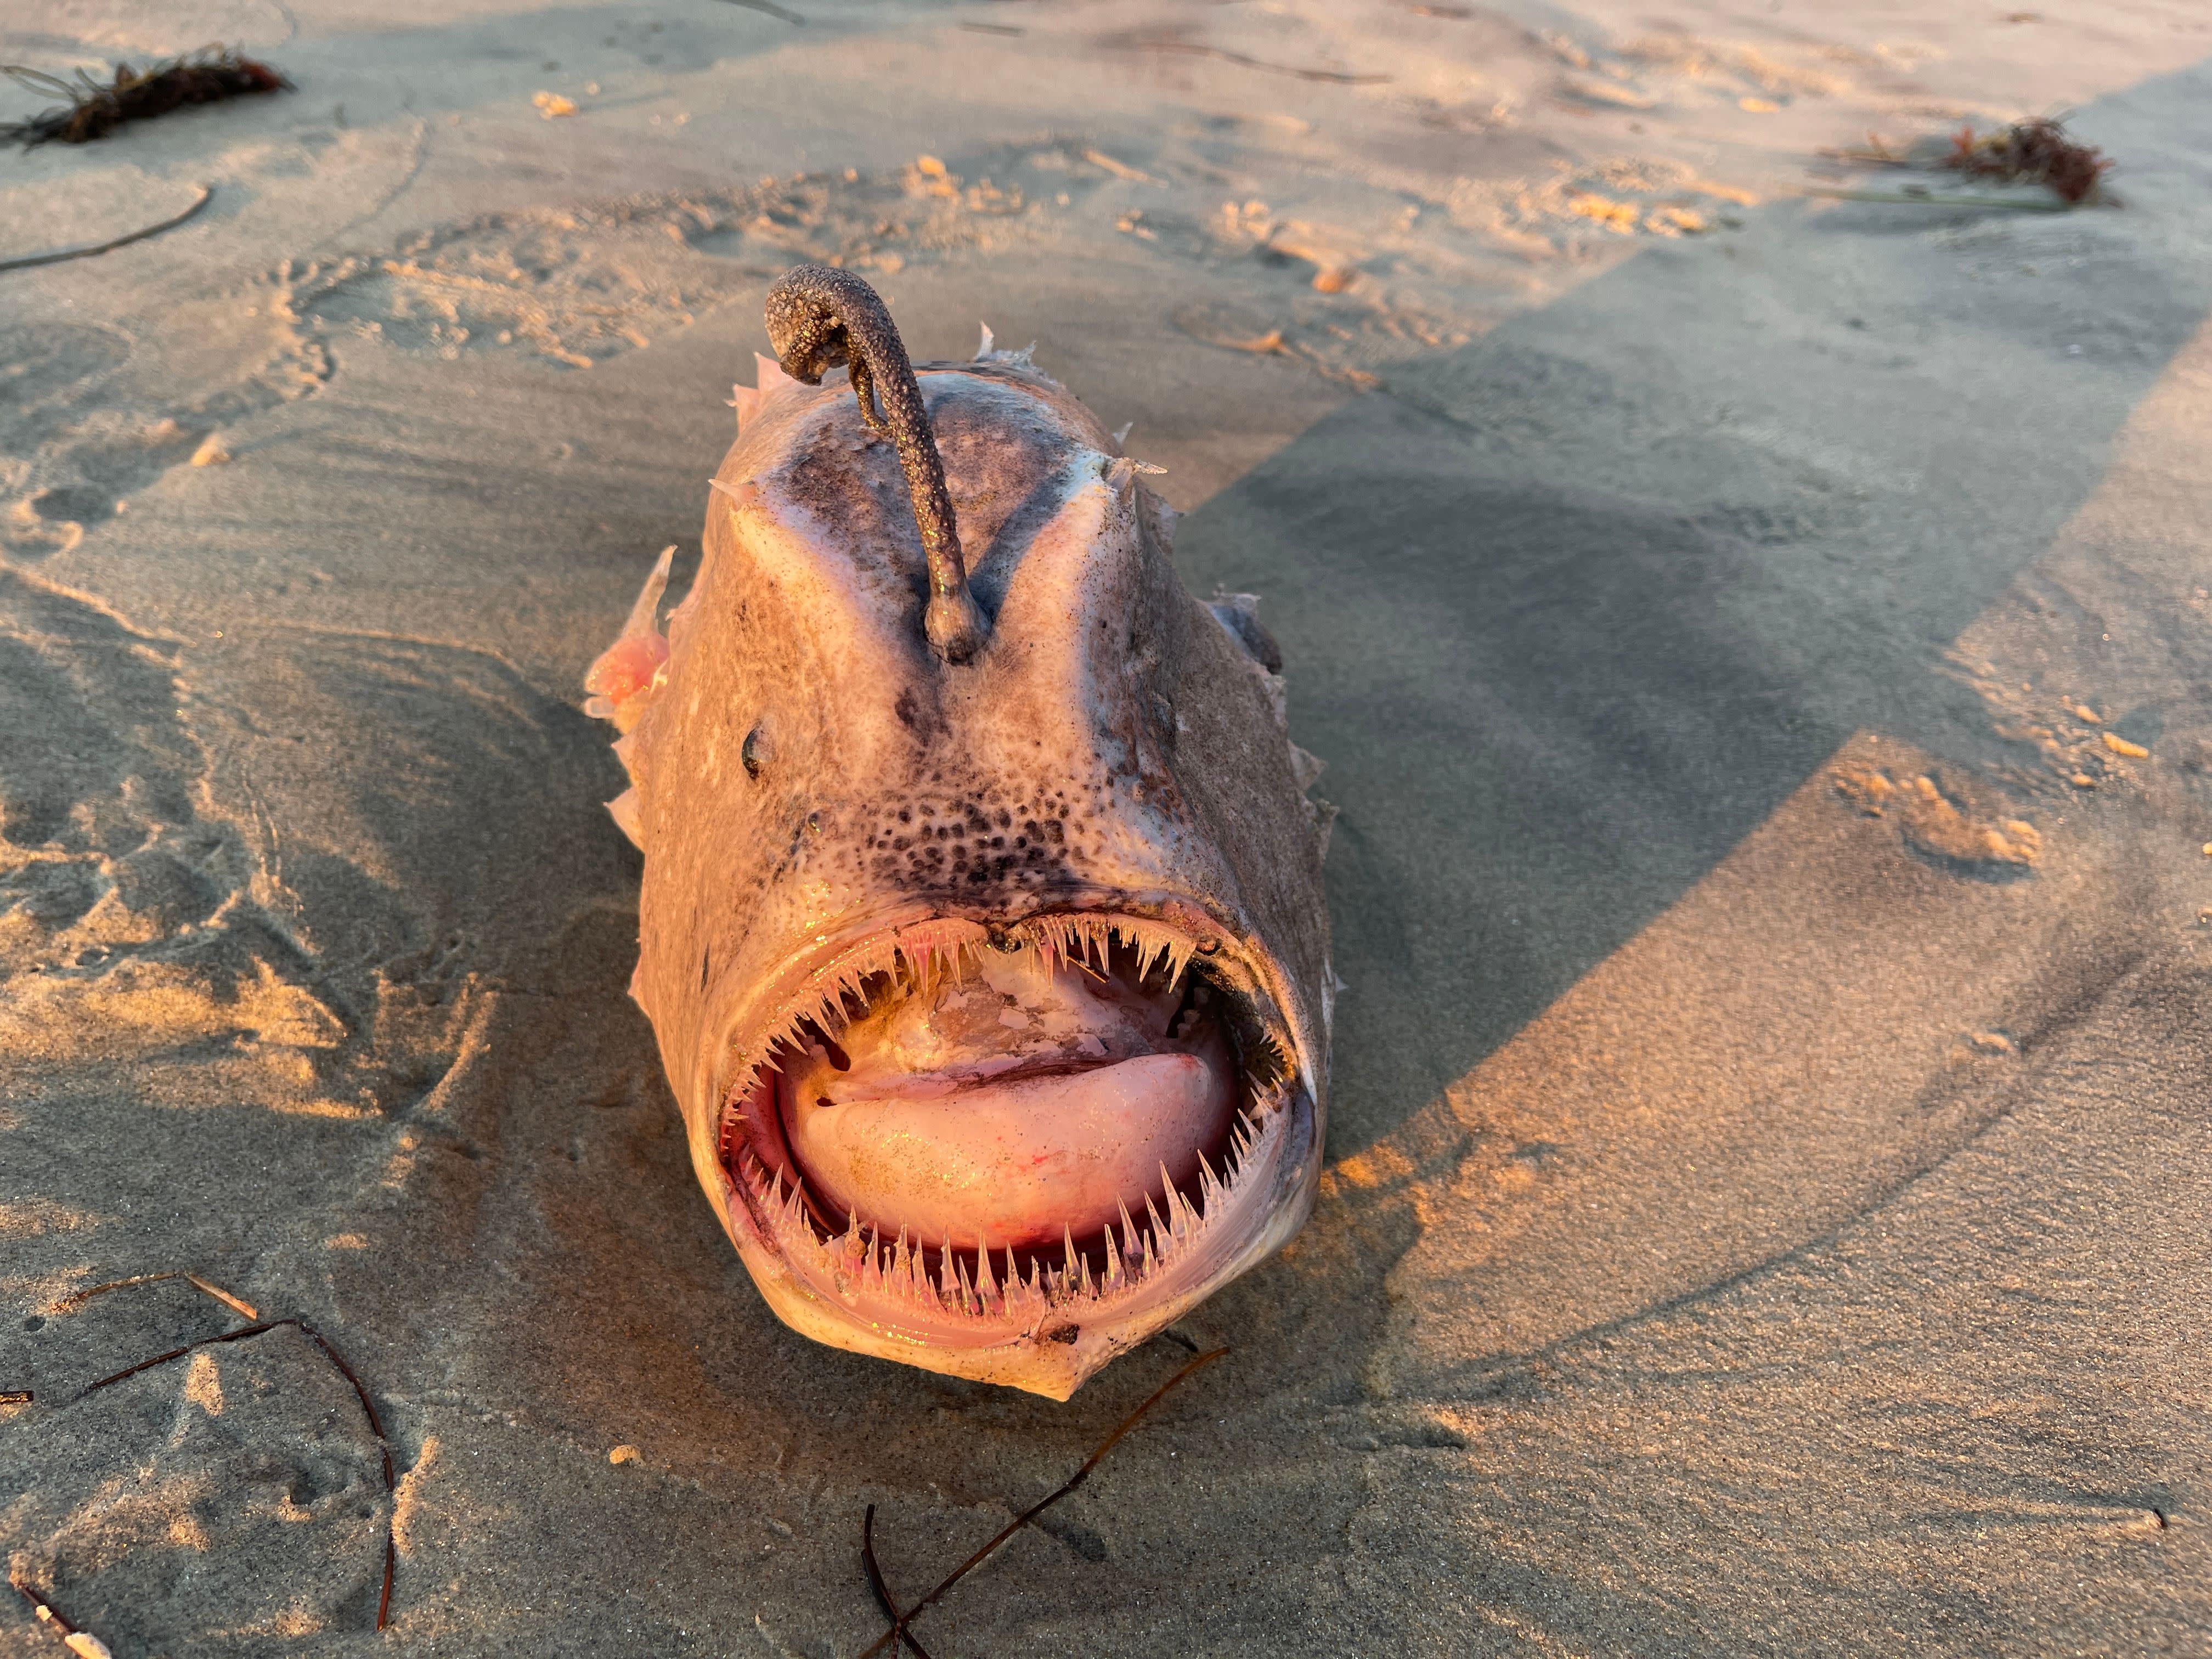 Man finds rare deep-sea monster on beach: 'Fearsome